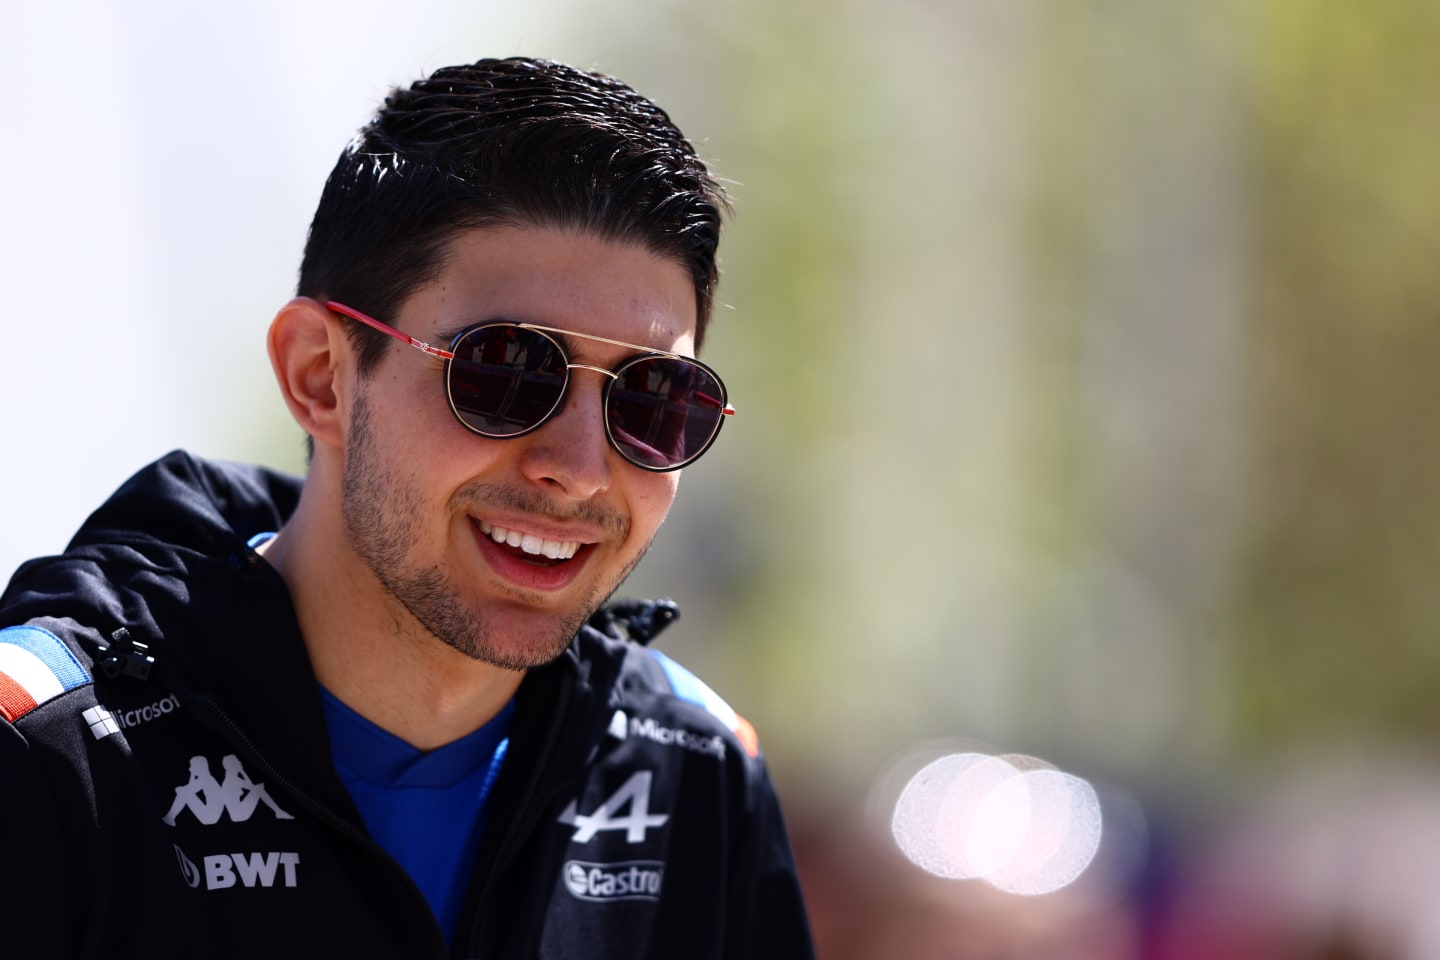 BAHRAIN, BAHRAIN - MARCH 18: Esteban Ocon of France and Alpine F1 looks on in the Paddock before practice ahead of the F1 Grand Prix of Bahrain at Bahrain International Circuit on March 18, 2022 in Bahrain, Bahrain. (Photo by Mark Thompson/Getty Images)